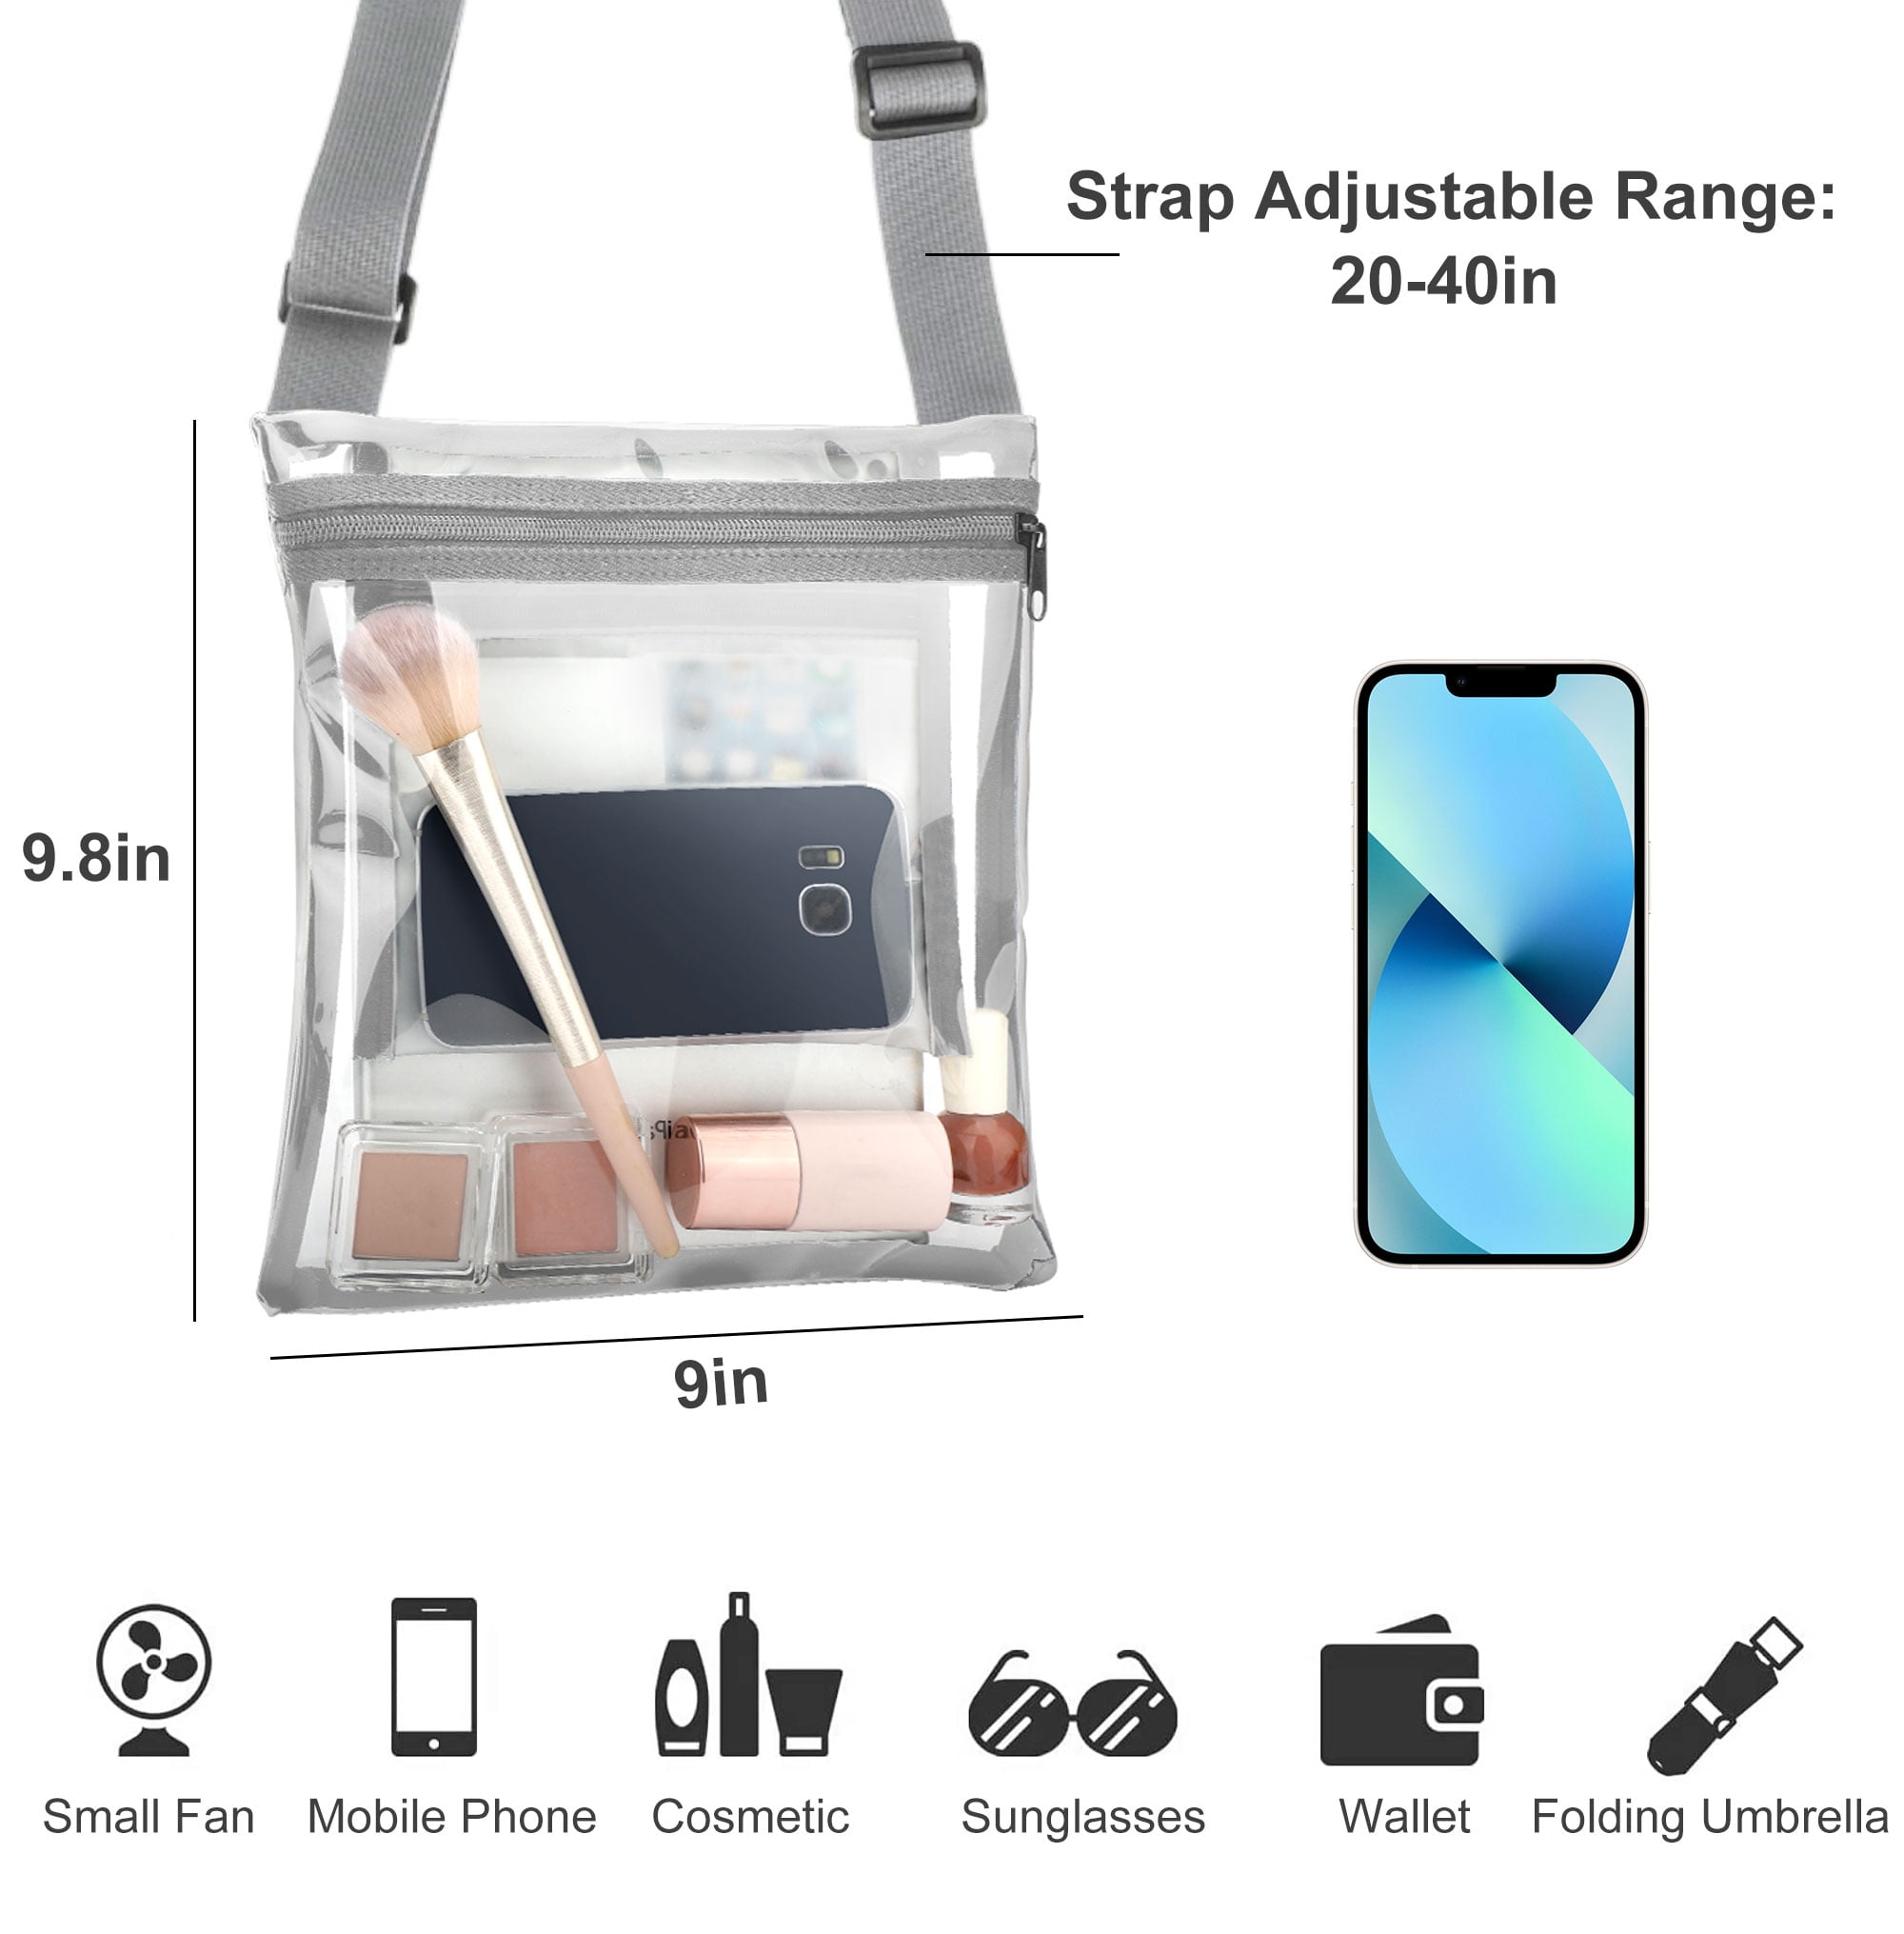 Clearance! Lotpreco Clear Bag Stadium Approved, Clear Crossbody Bag with  Adjustable Strap Clear Stadium Bag for Concerts Sports